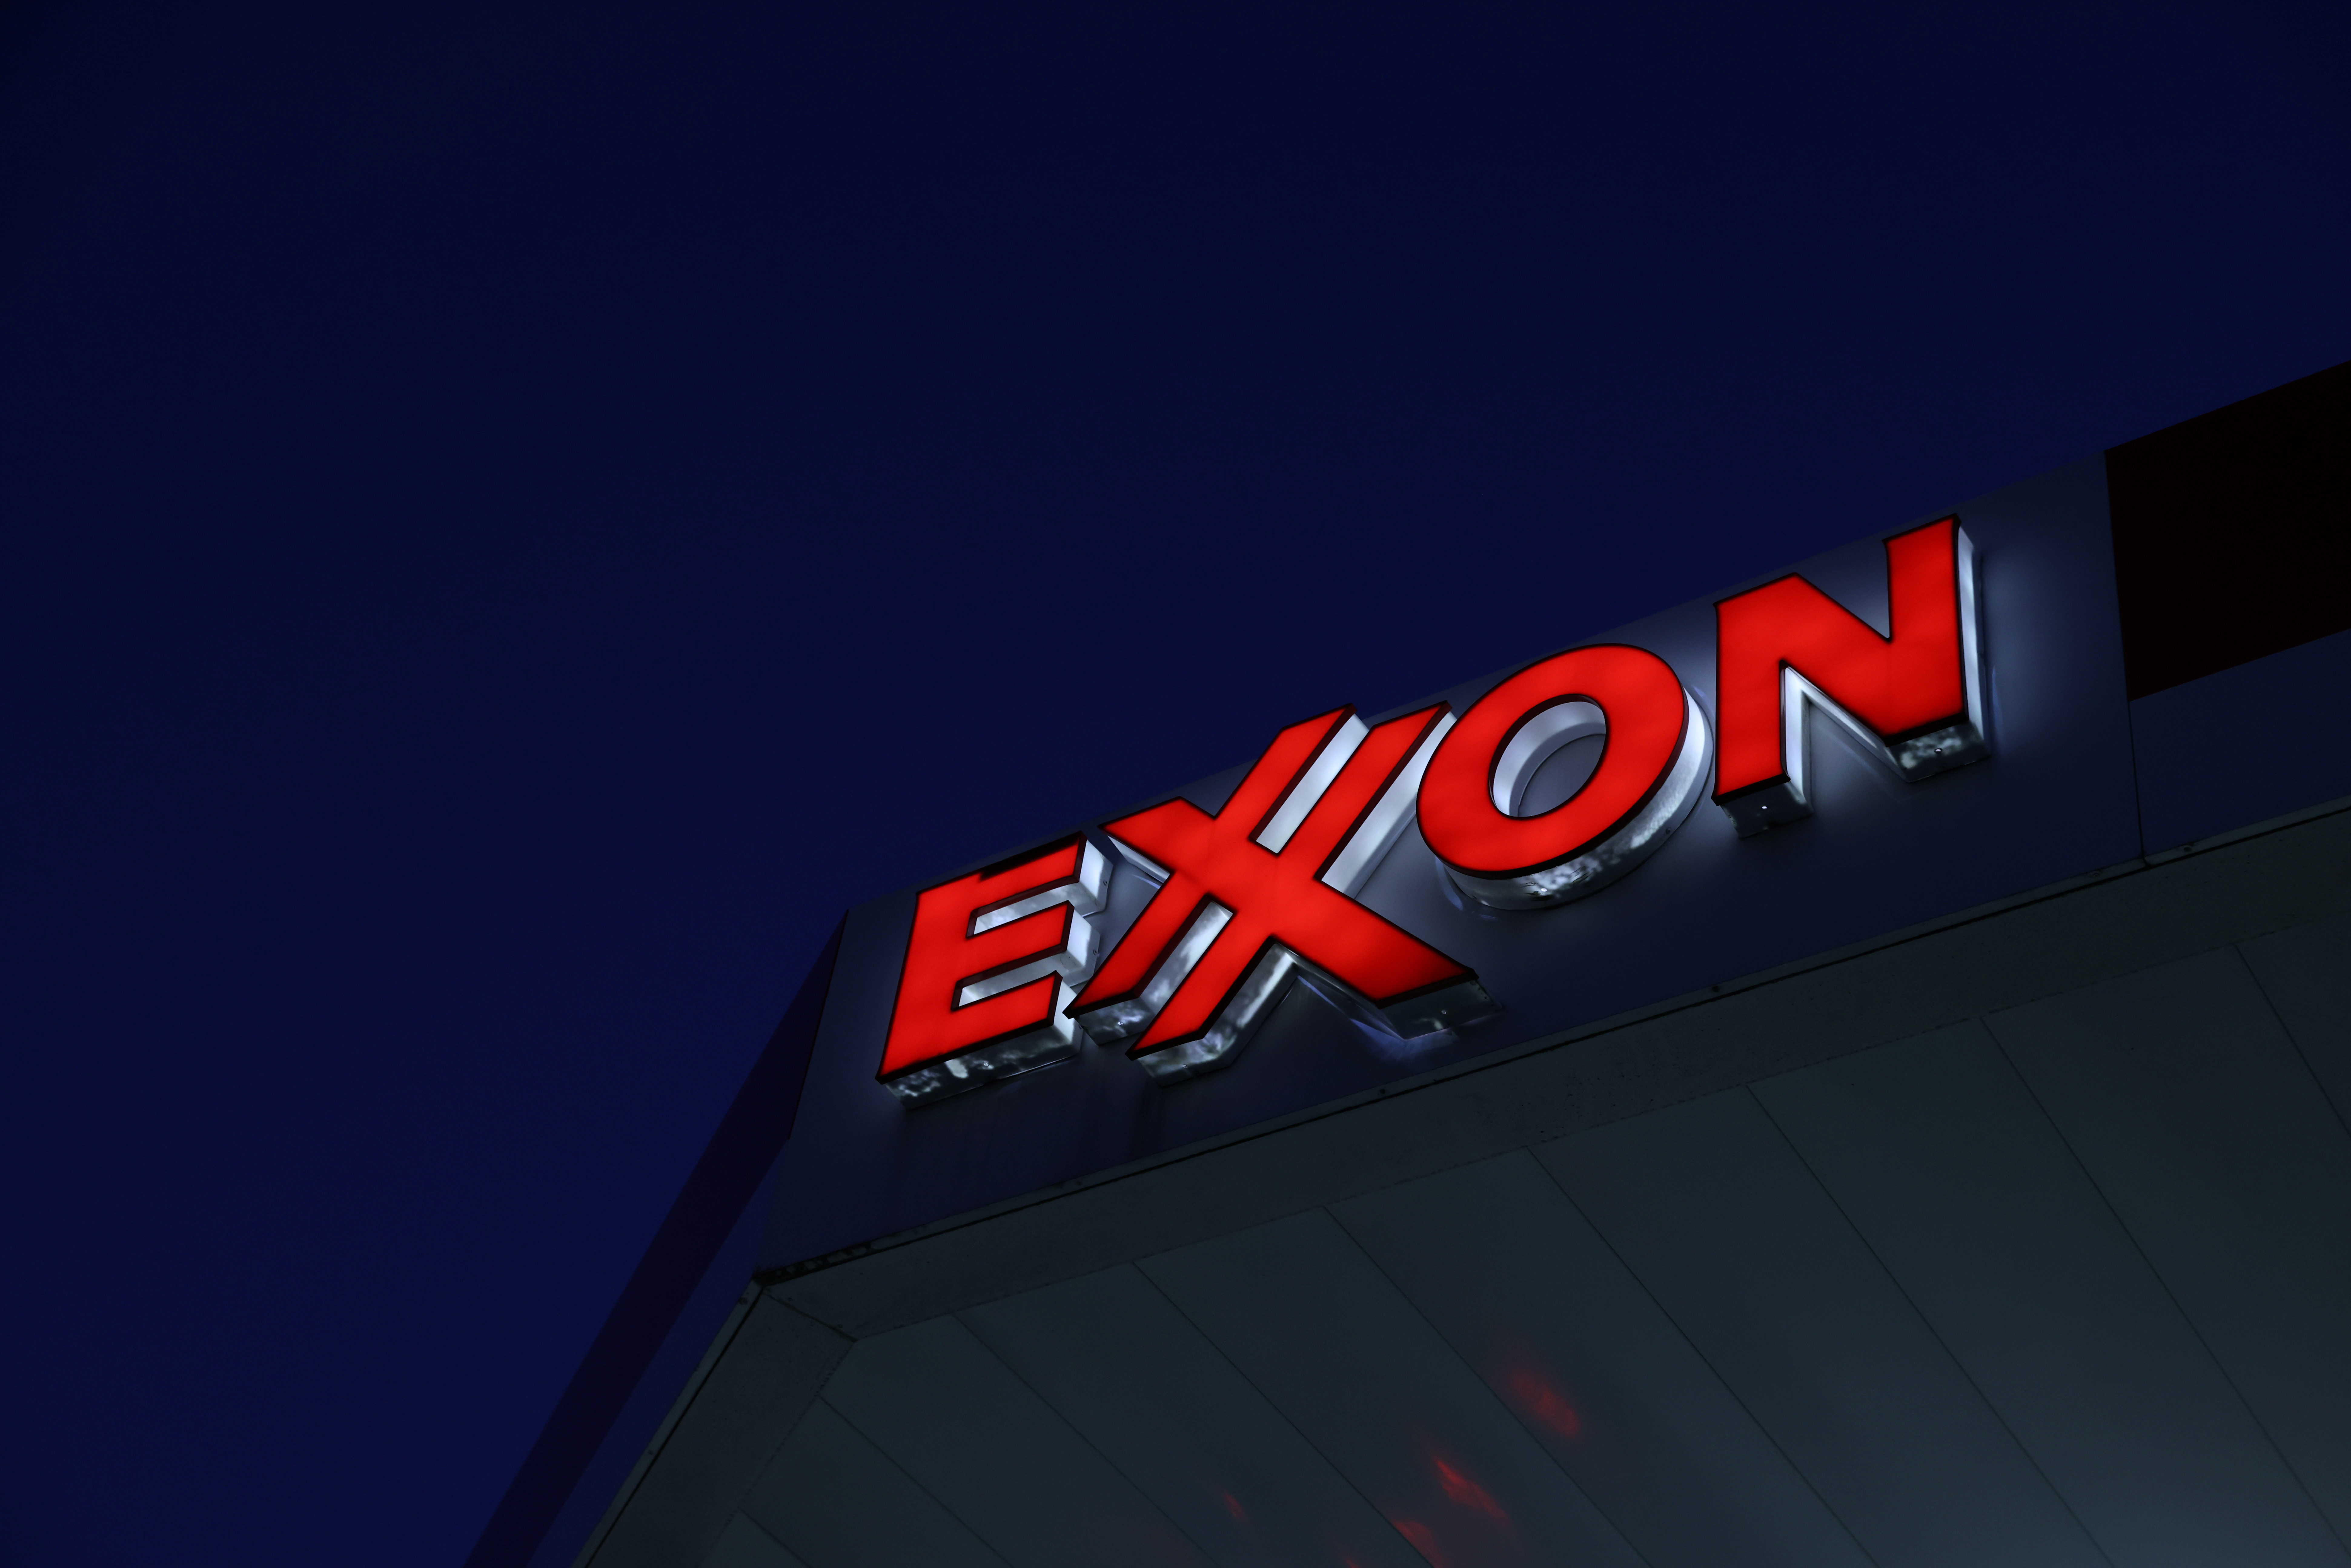 Signage is seen at an Exxon gas station in Brooklyn, New York City, U.S., November 23, 2021. REUTERS/Andrew Kelly